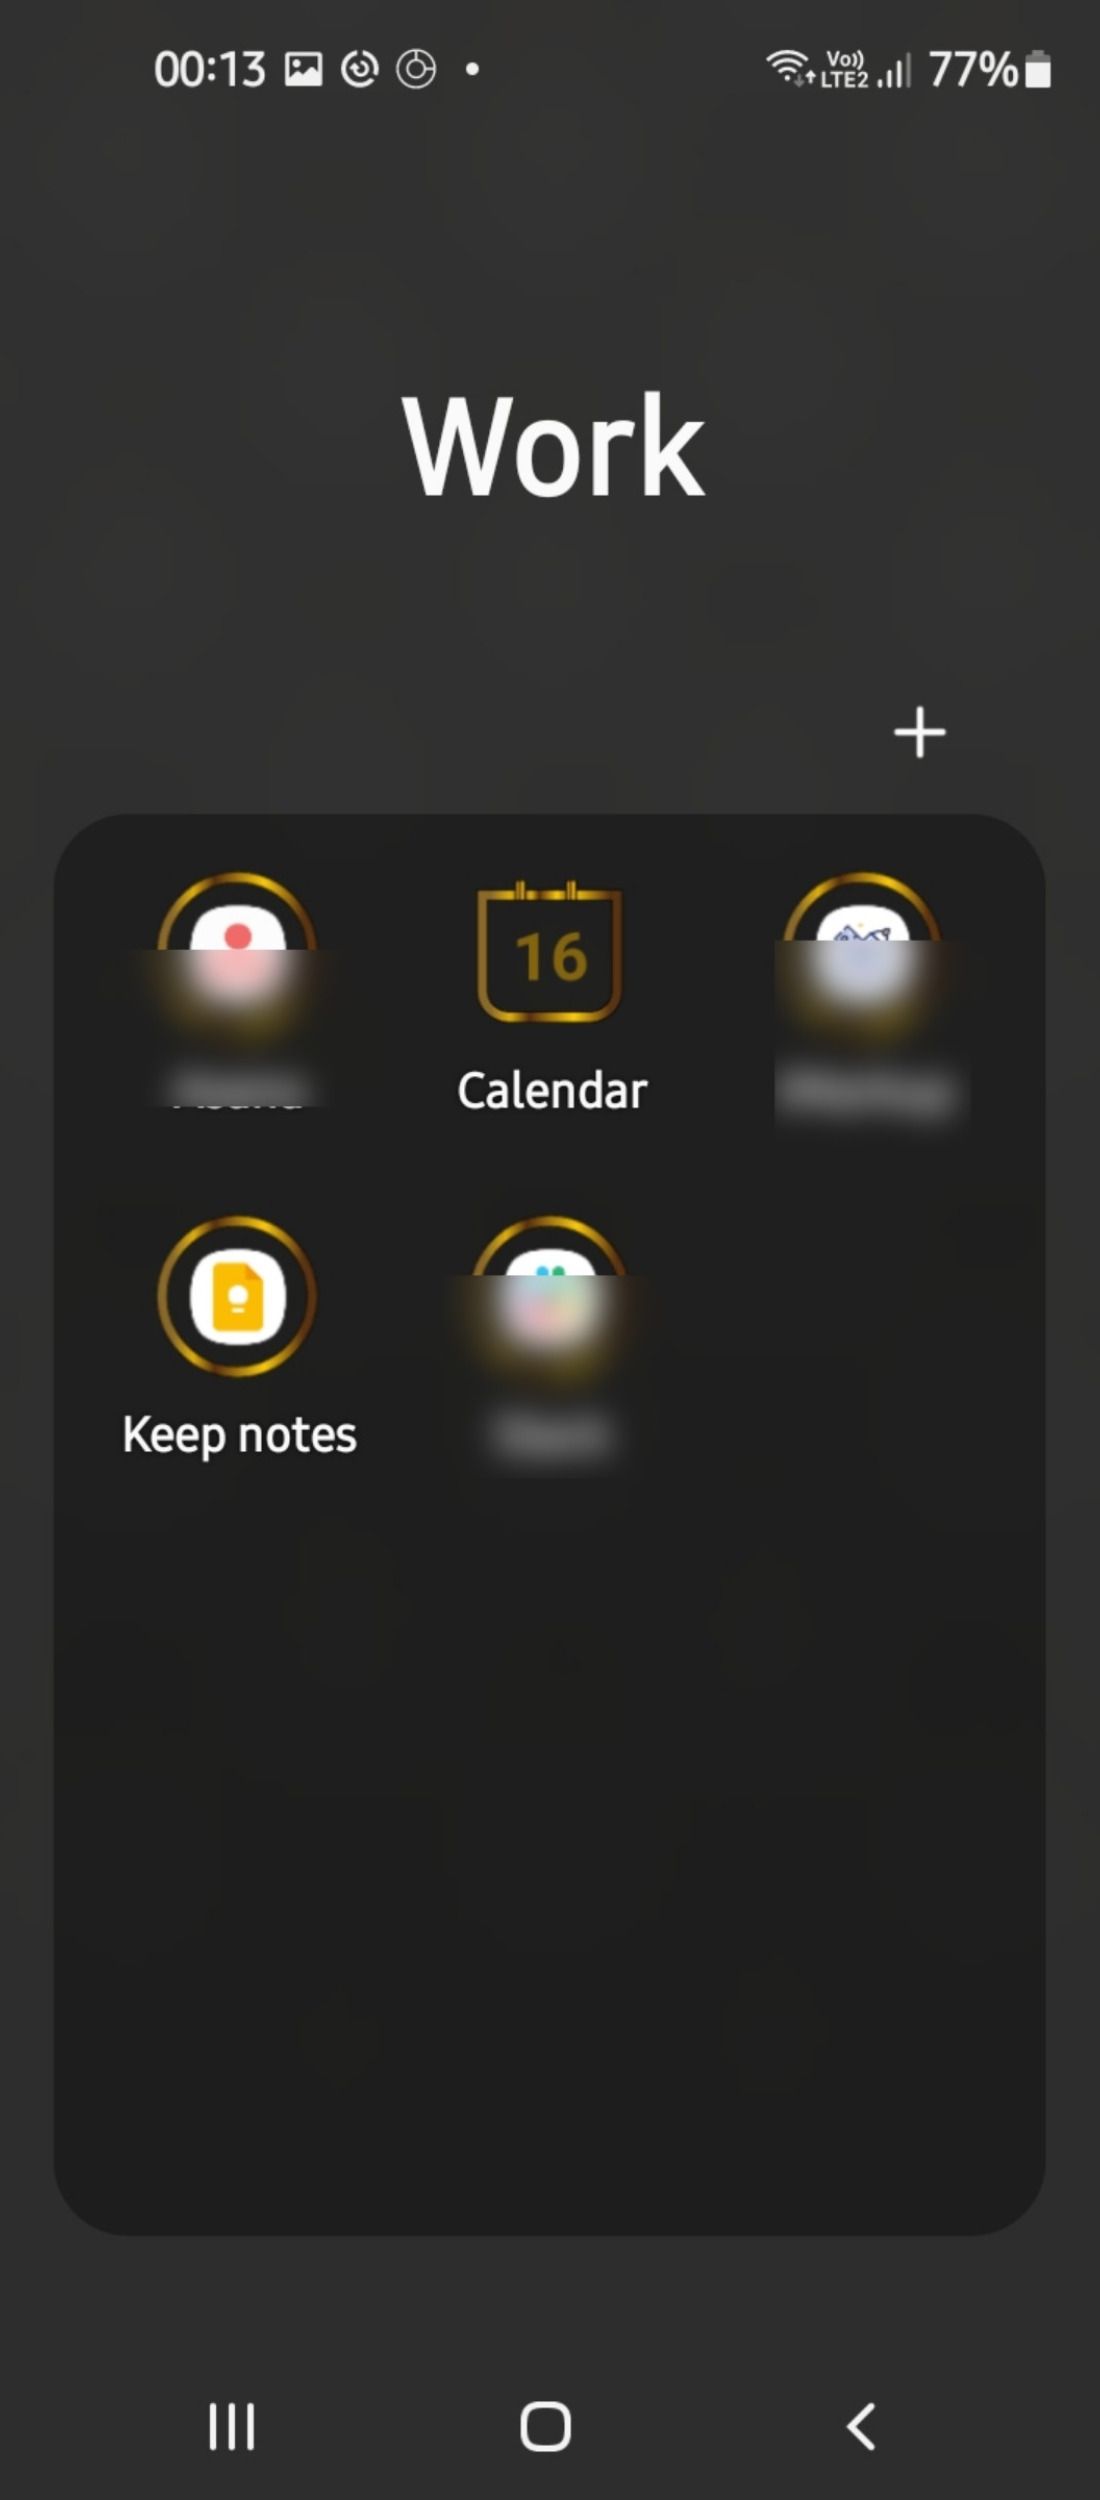 Organizaton of apps by verb-themed folders